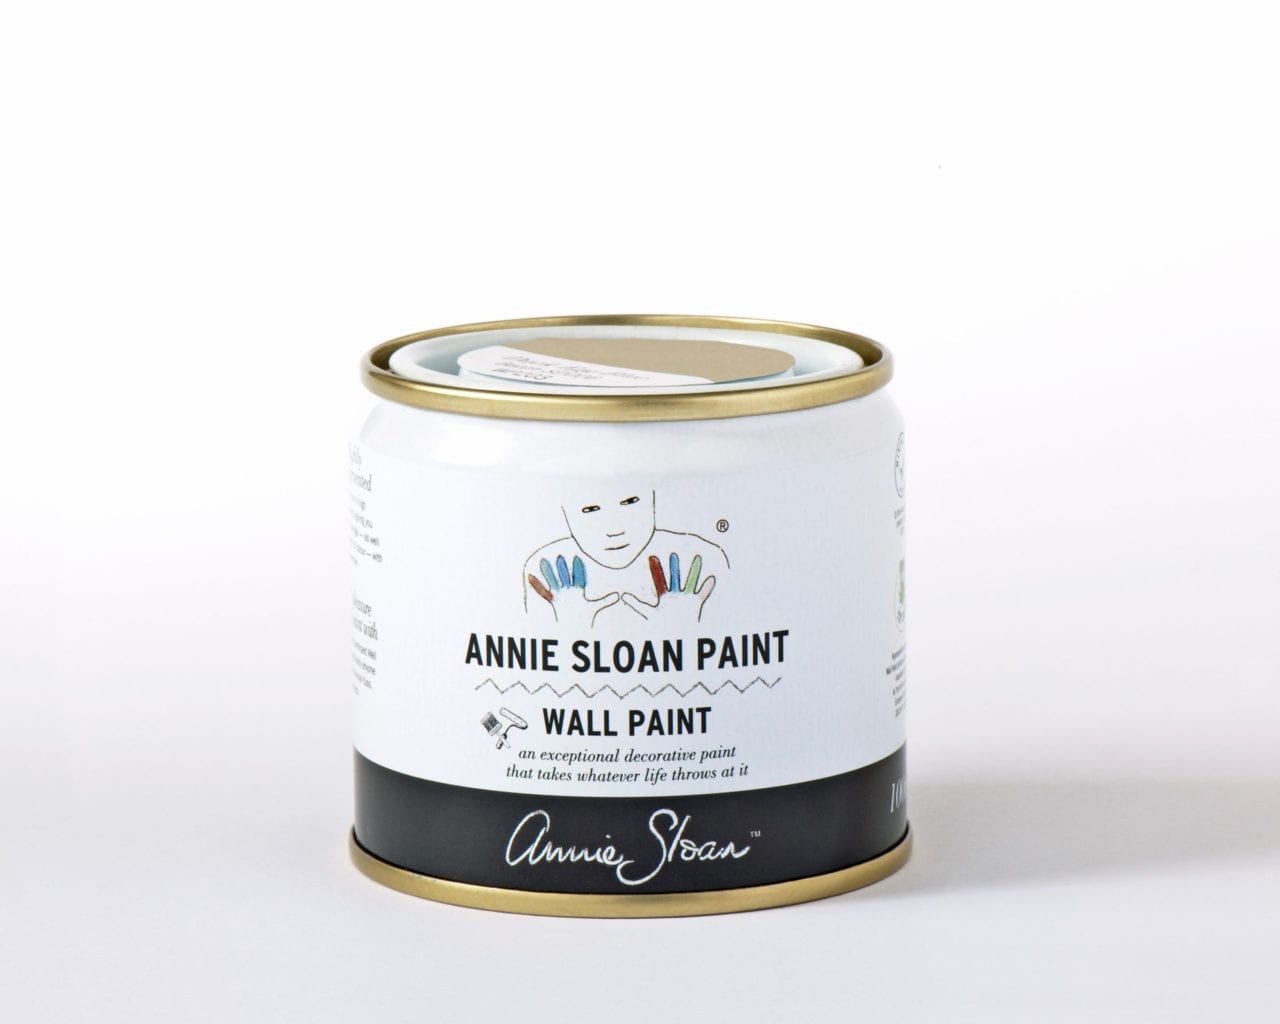 1641469090Country-Grey-Annie-Sloan-Wall-Paint-100-ml-tin-scaled-1.jpg